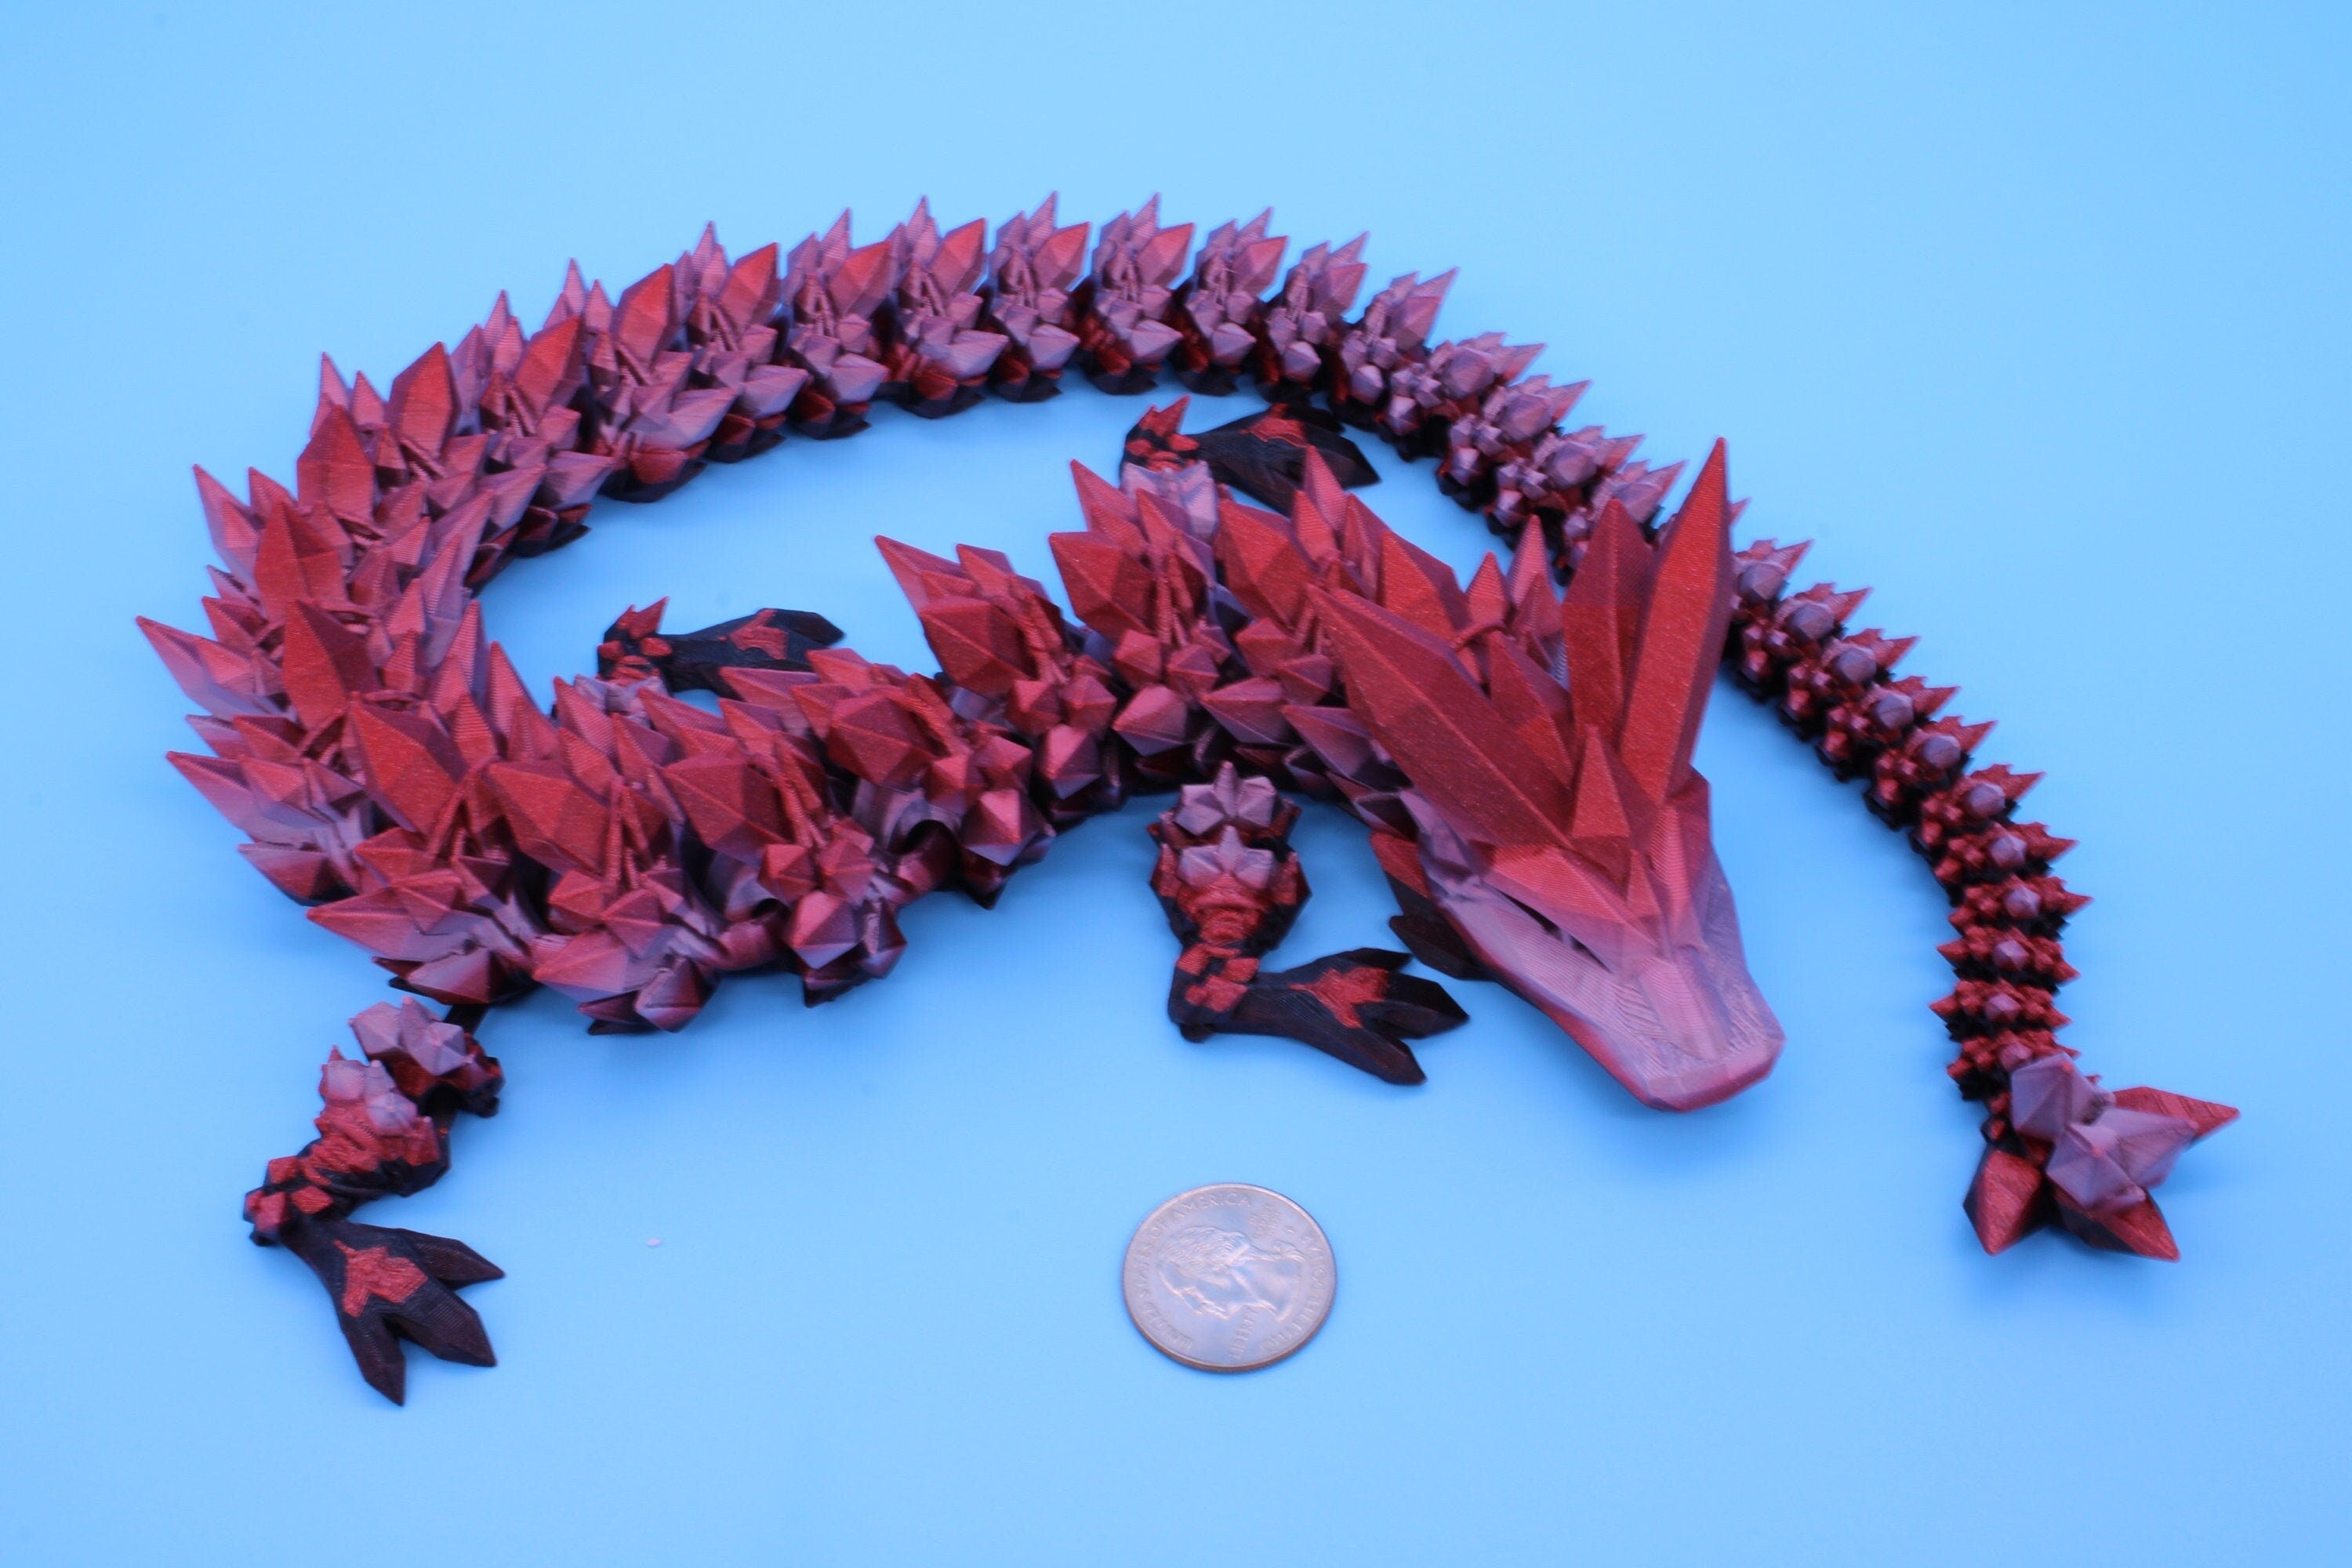 3d printed Articulating Flexi Crystal Dragon designed by